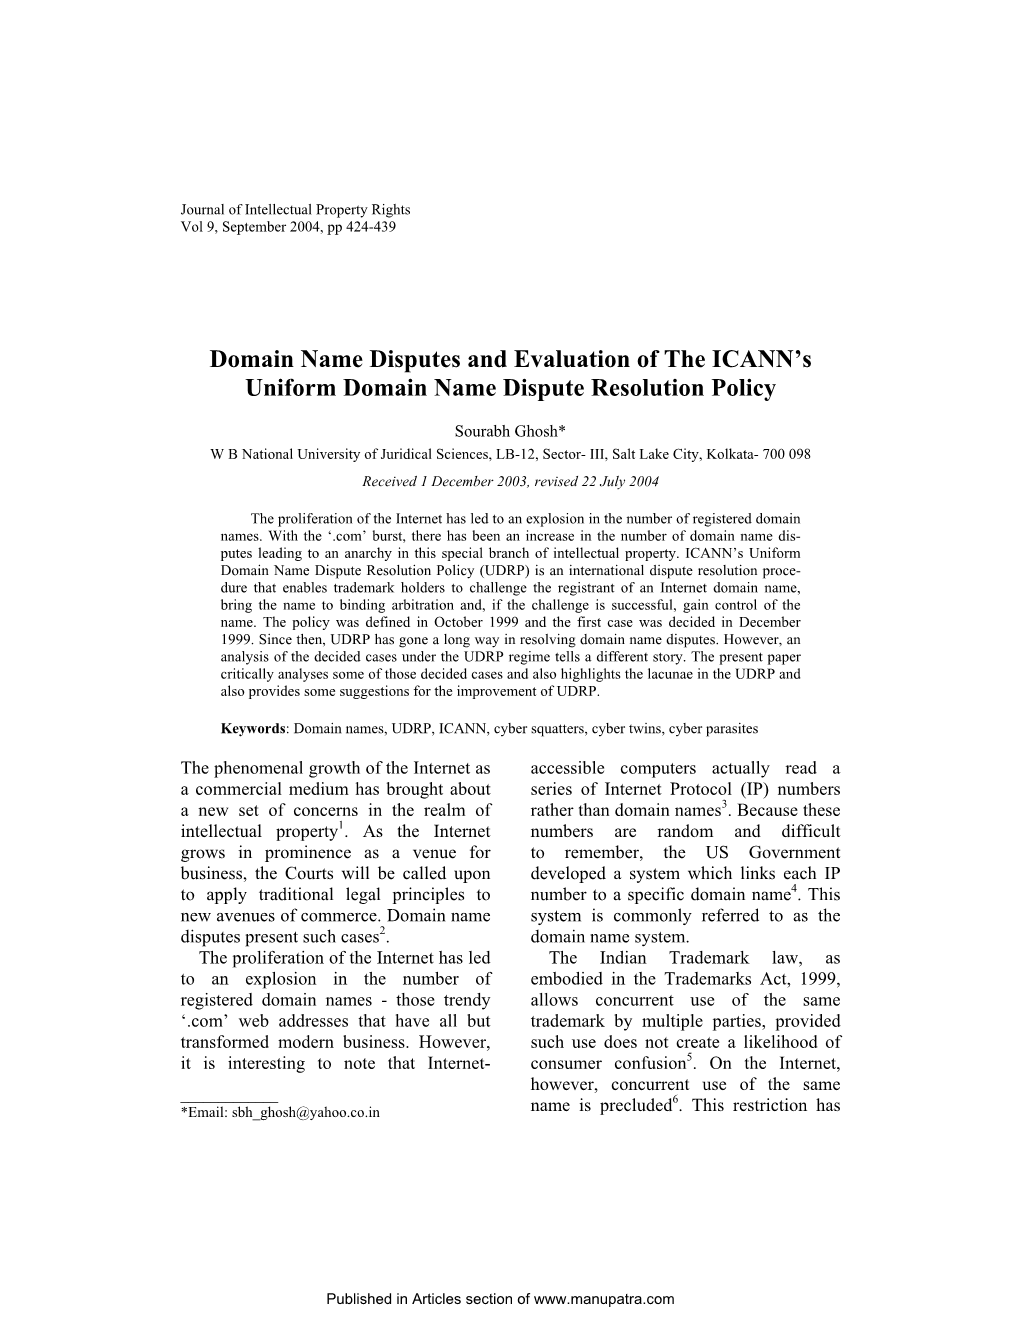 Domain Name Disputes and Evaluation of the ICANN’S Uniform Domain Name Dispute Resolution Policy